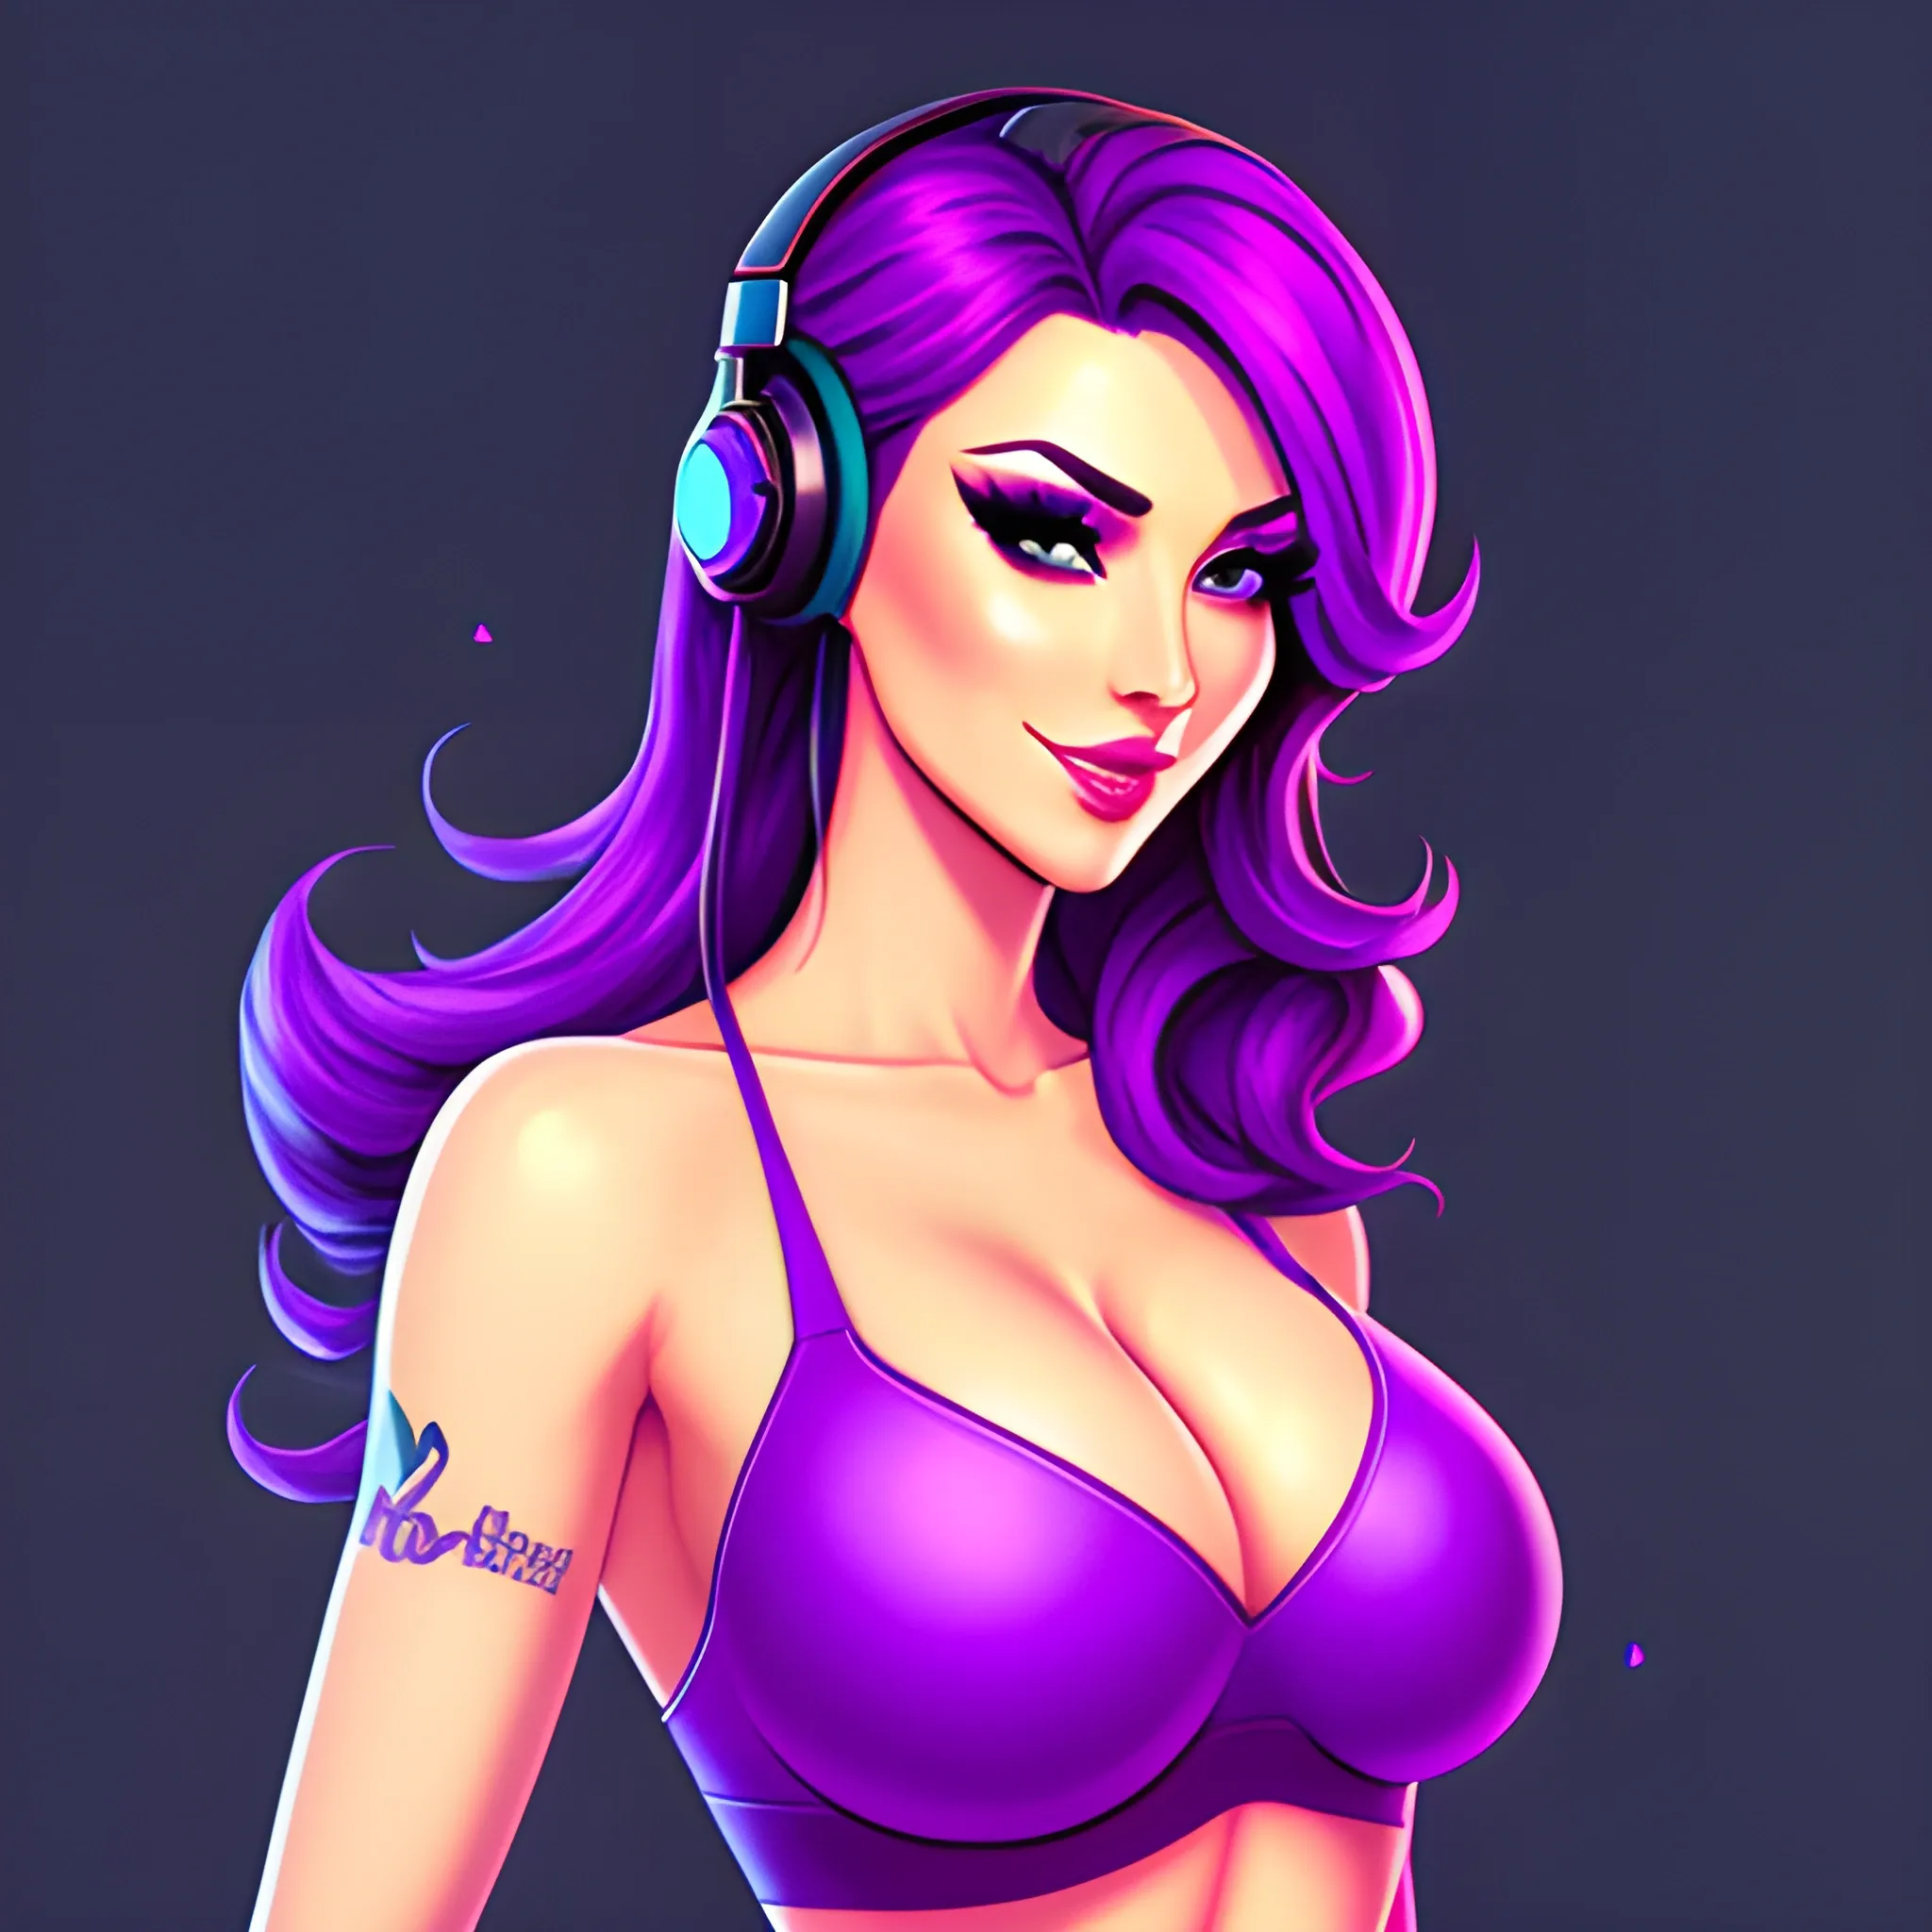 A beautiful girl while streaming on twitch , attractive gaming background, 2d hd mascot, 1080x1920 pixels